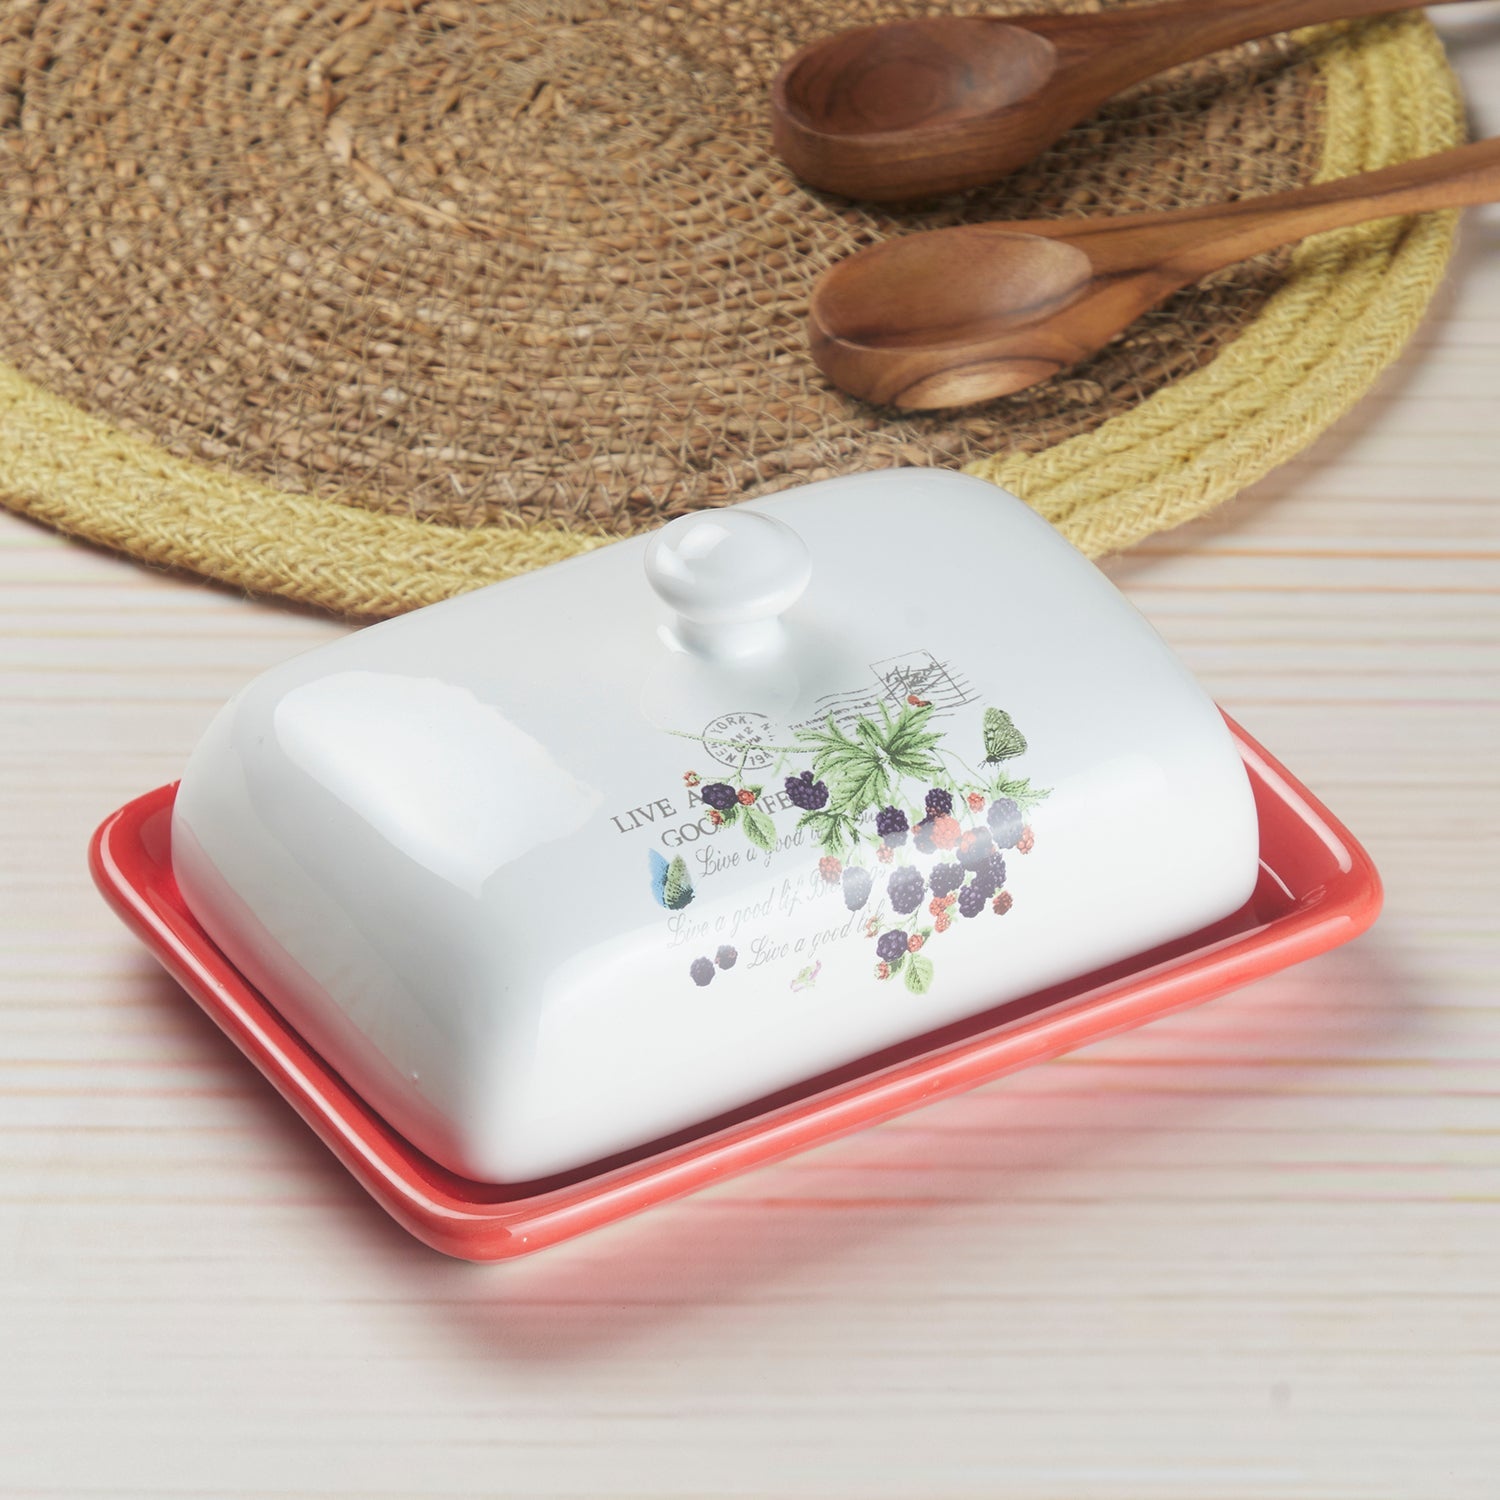 Kookee Ceramic Butter Dish Tray with Lid with 250g capacity for Kitchen, Dining Table & Restaurants (8355)